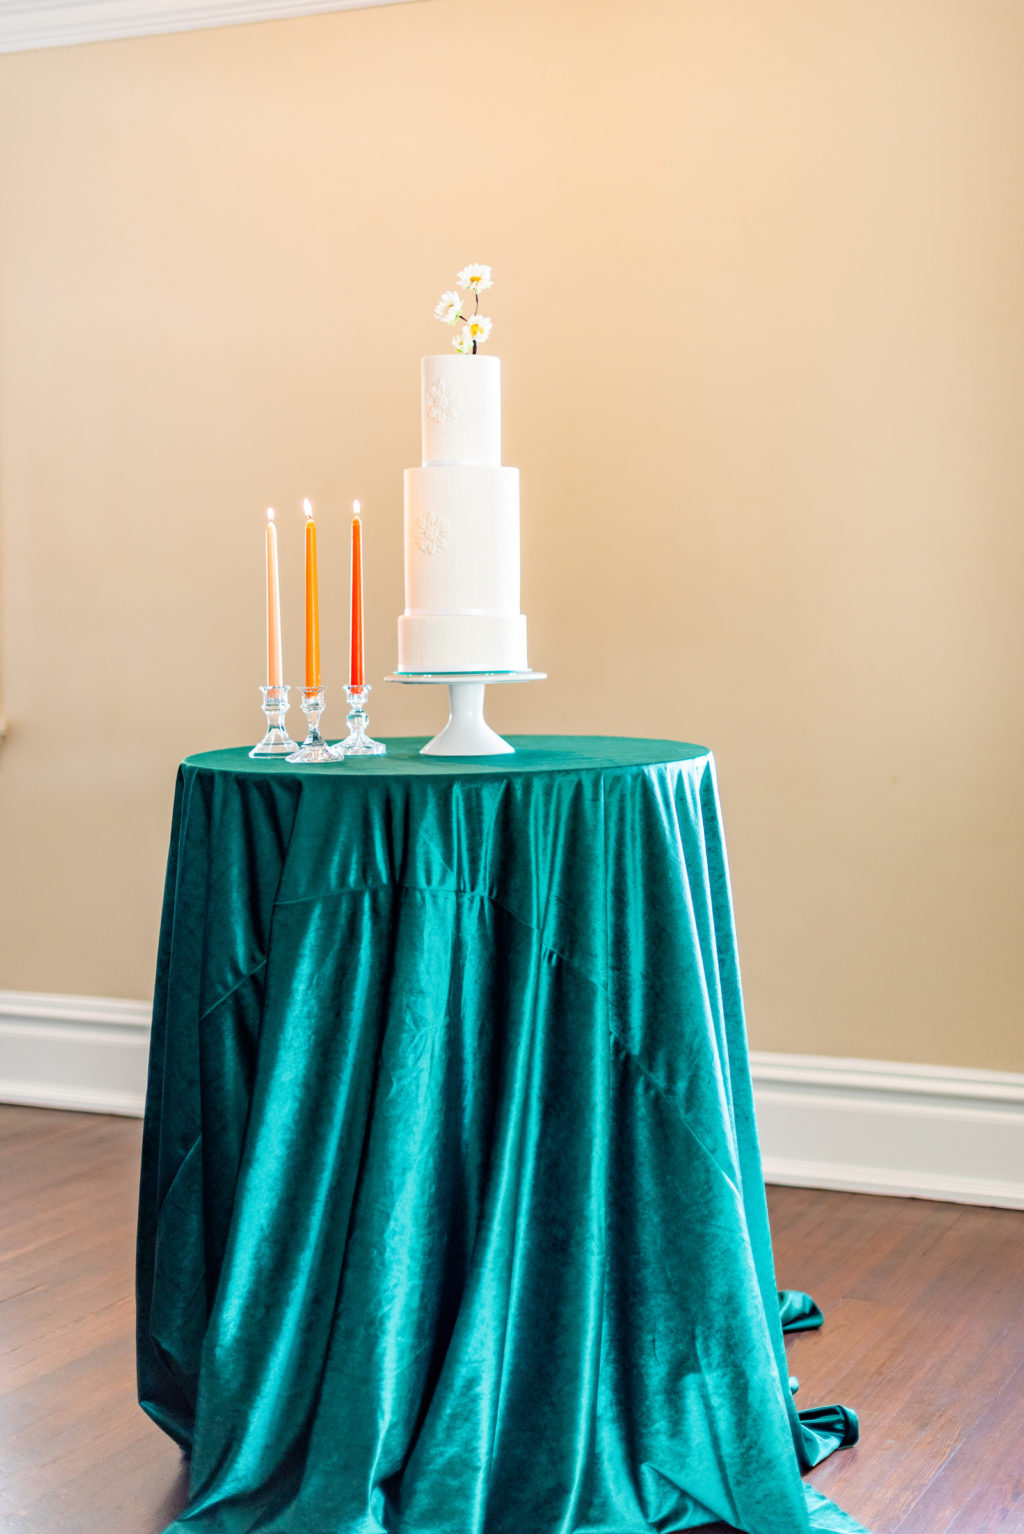 Tampa Wedding Styled Shoot 70's Retro Vintage | White Pattern Embossed Mosaic Fondant Wedding Cake with Sugar Flowers | Emerald Green Velvet Cake Table Linen with Colorful Taper Candles